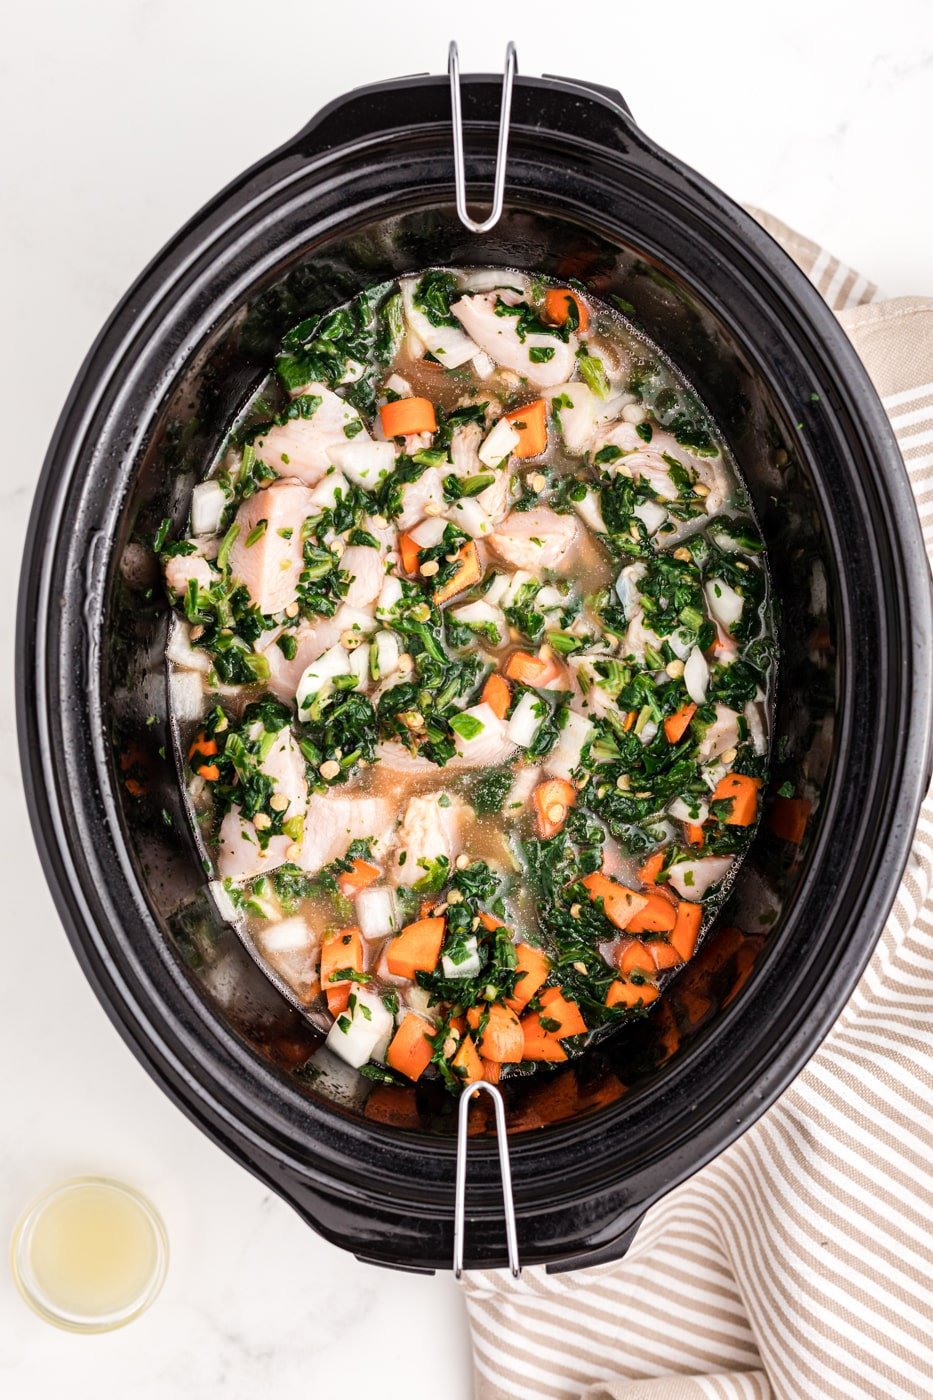 a crockpot with chicken, lentils, and veggies